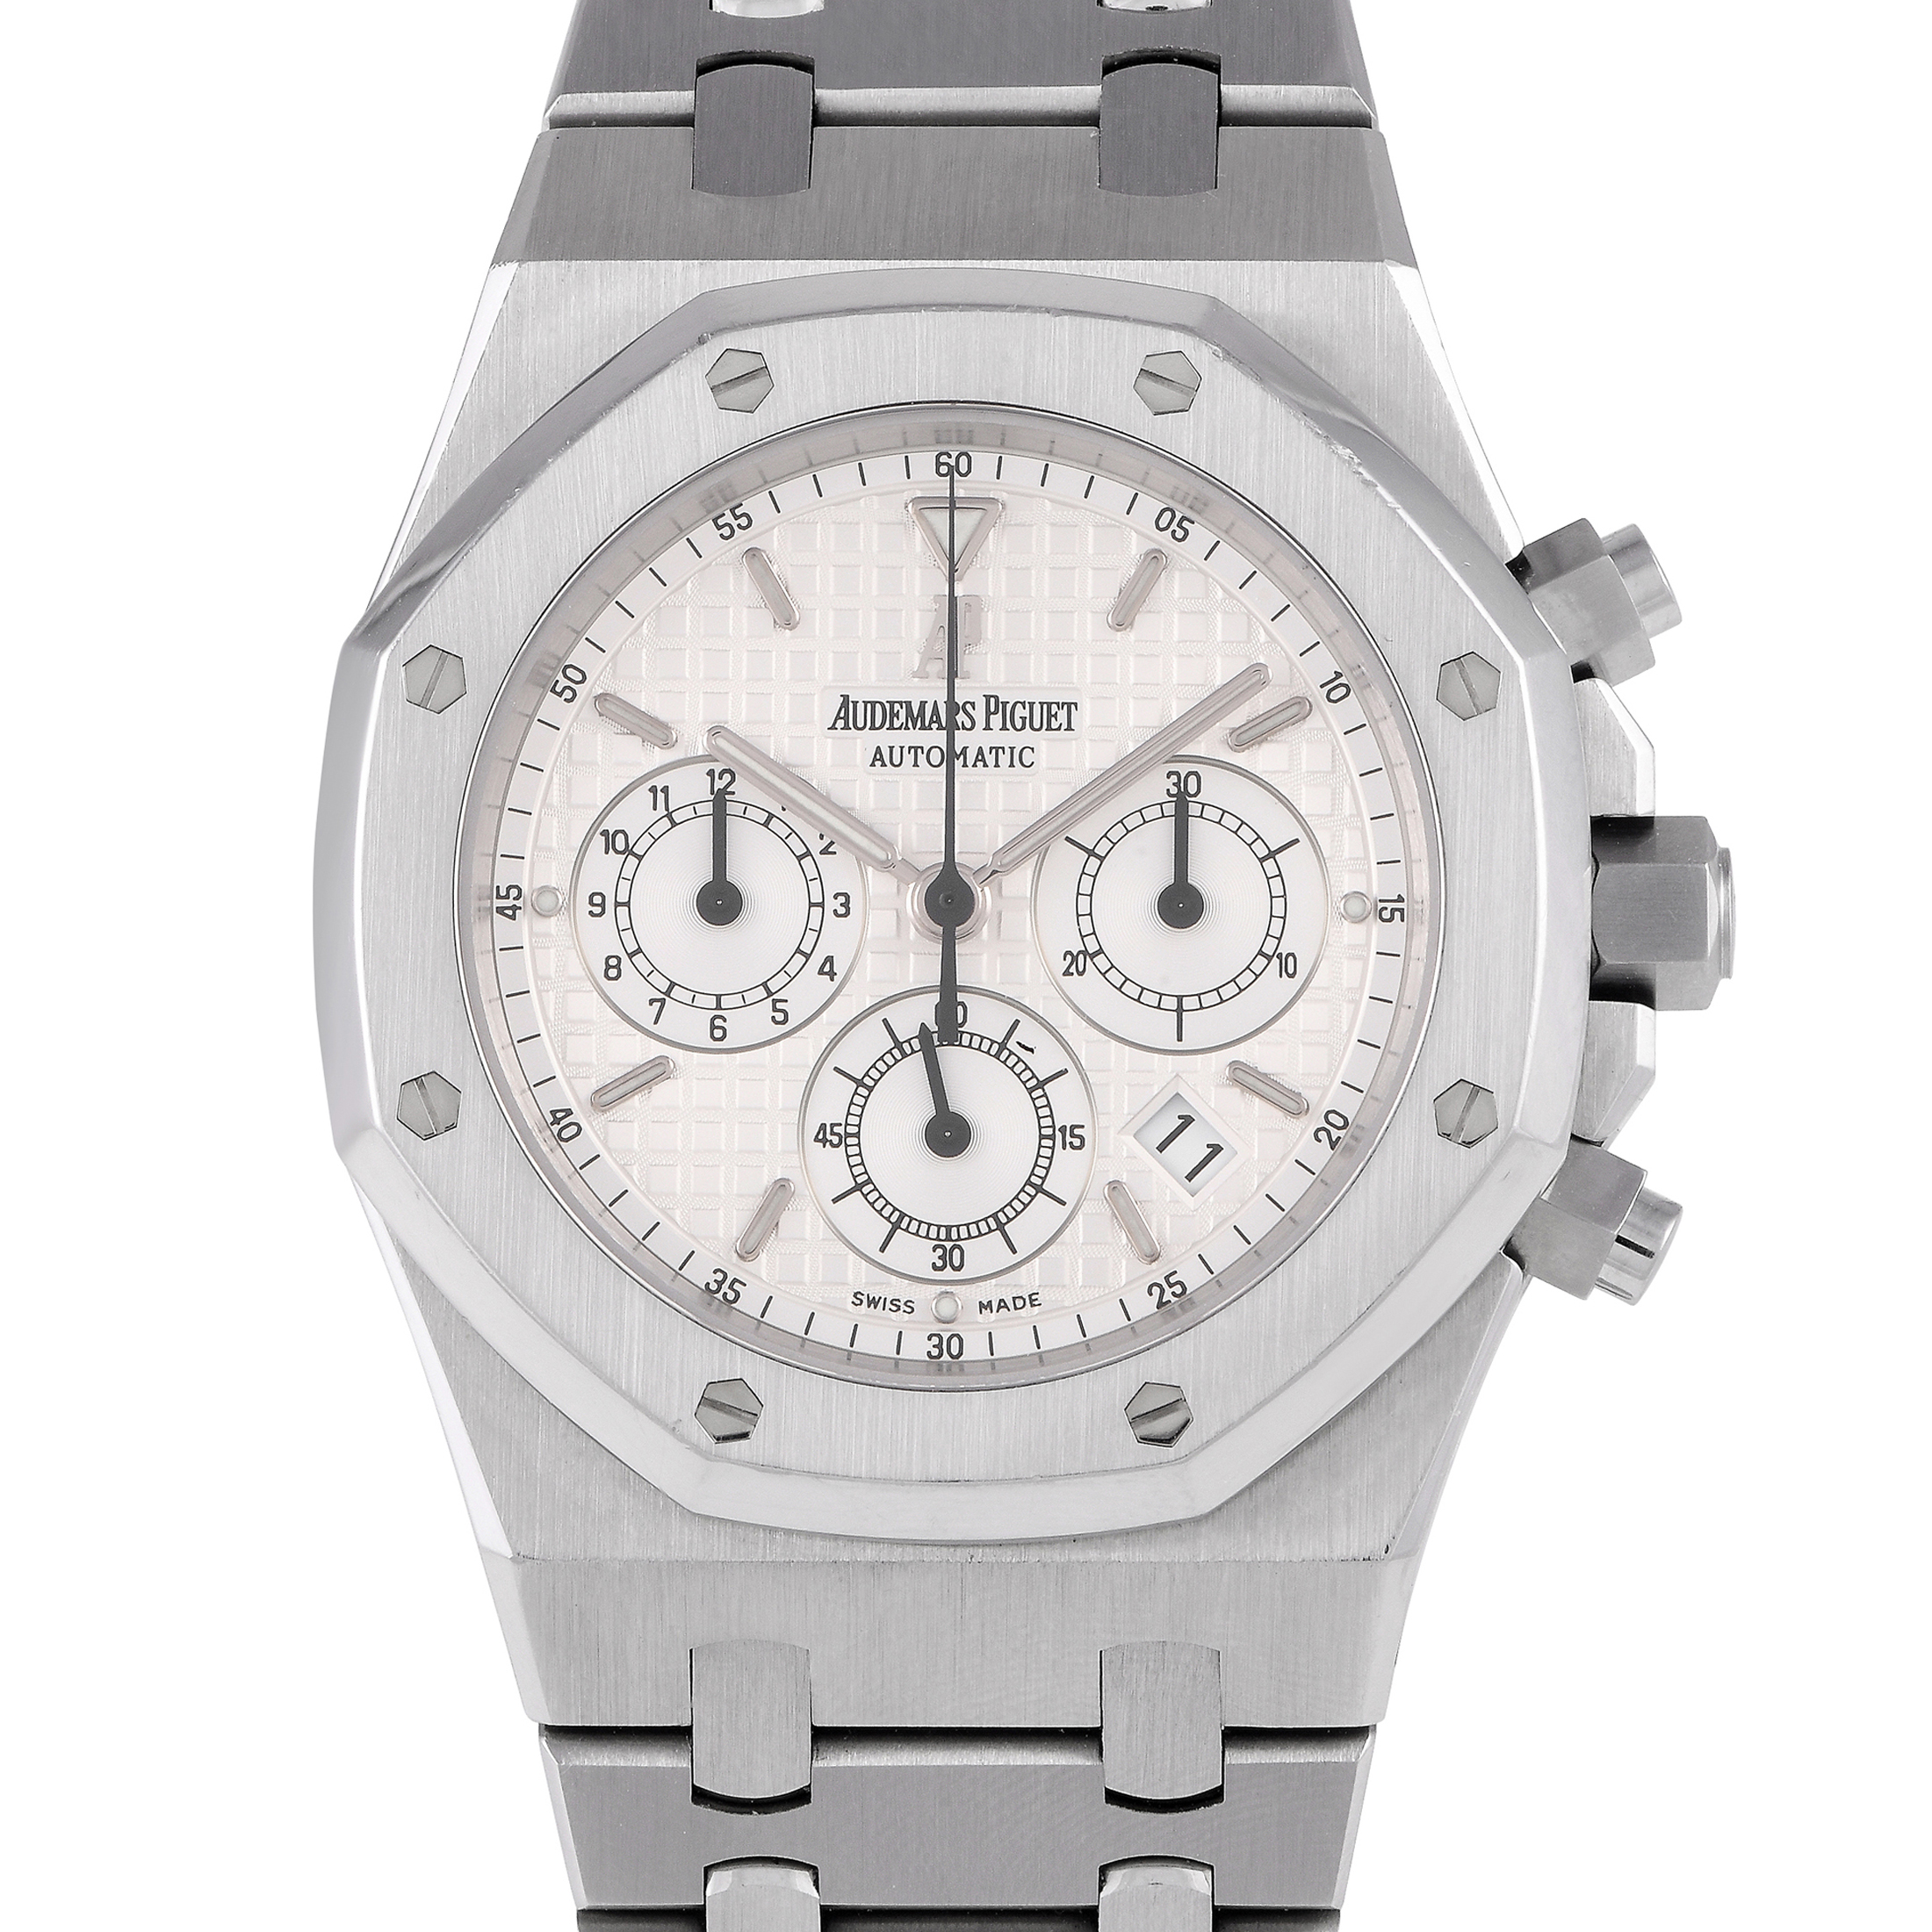 Audemars Piguet Royal Oak White Dial Stainless Steel Chronograph Watch 25860ST.OO.1110ST.05